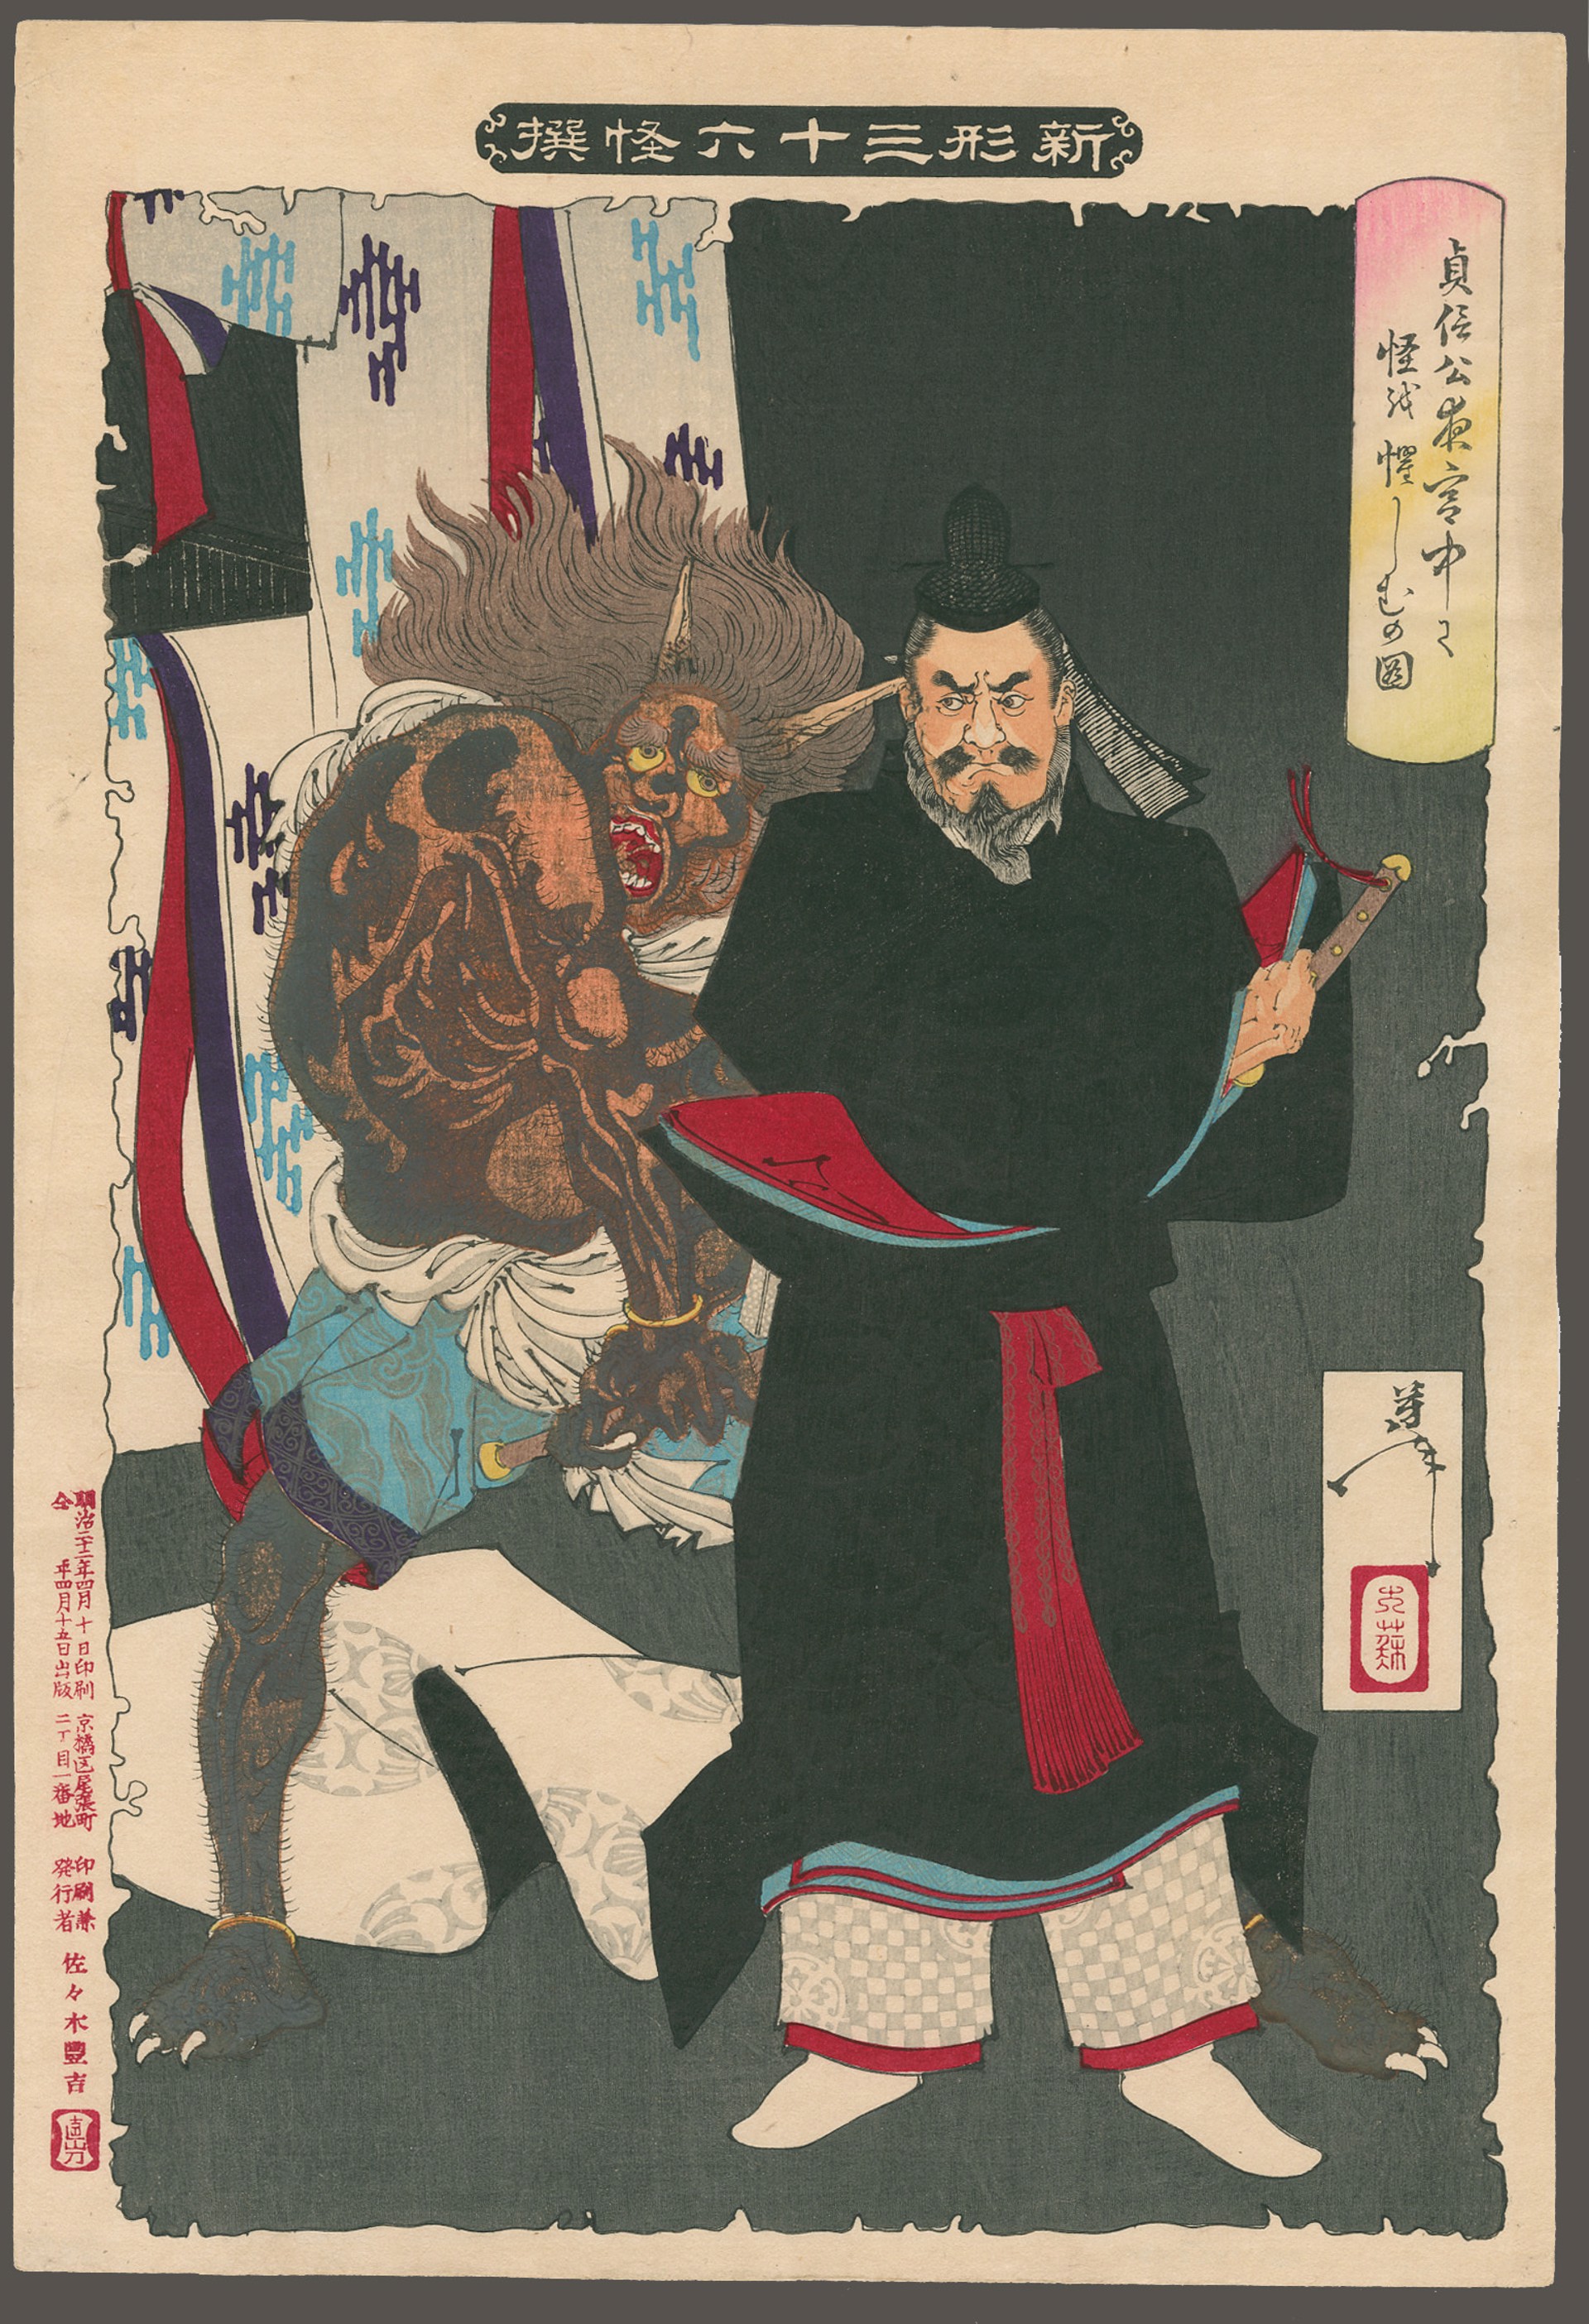 A Demon Makes a Nightly Charge at a Haunted Lord in the Imperial Palace. 36 Ghosts by Yoshitoshi